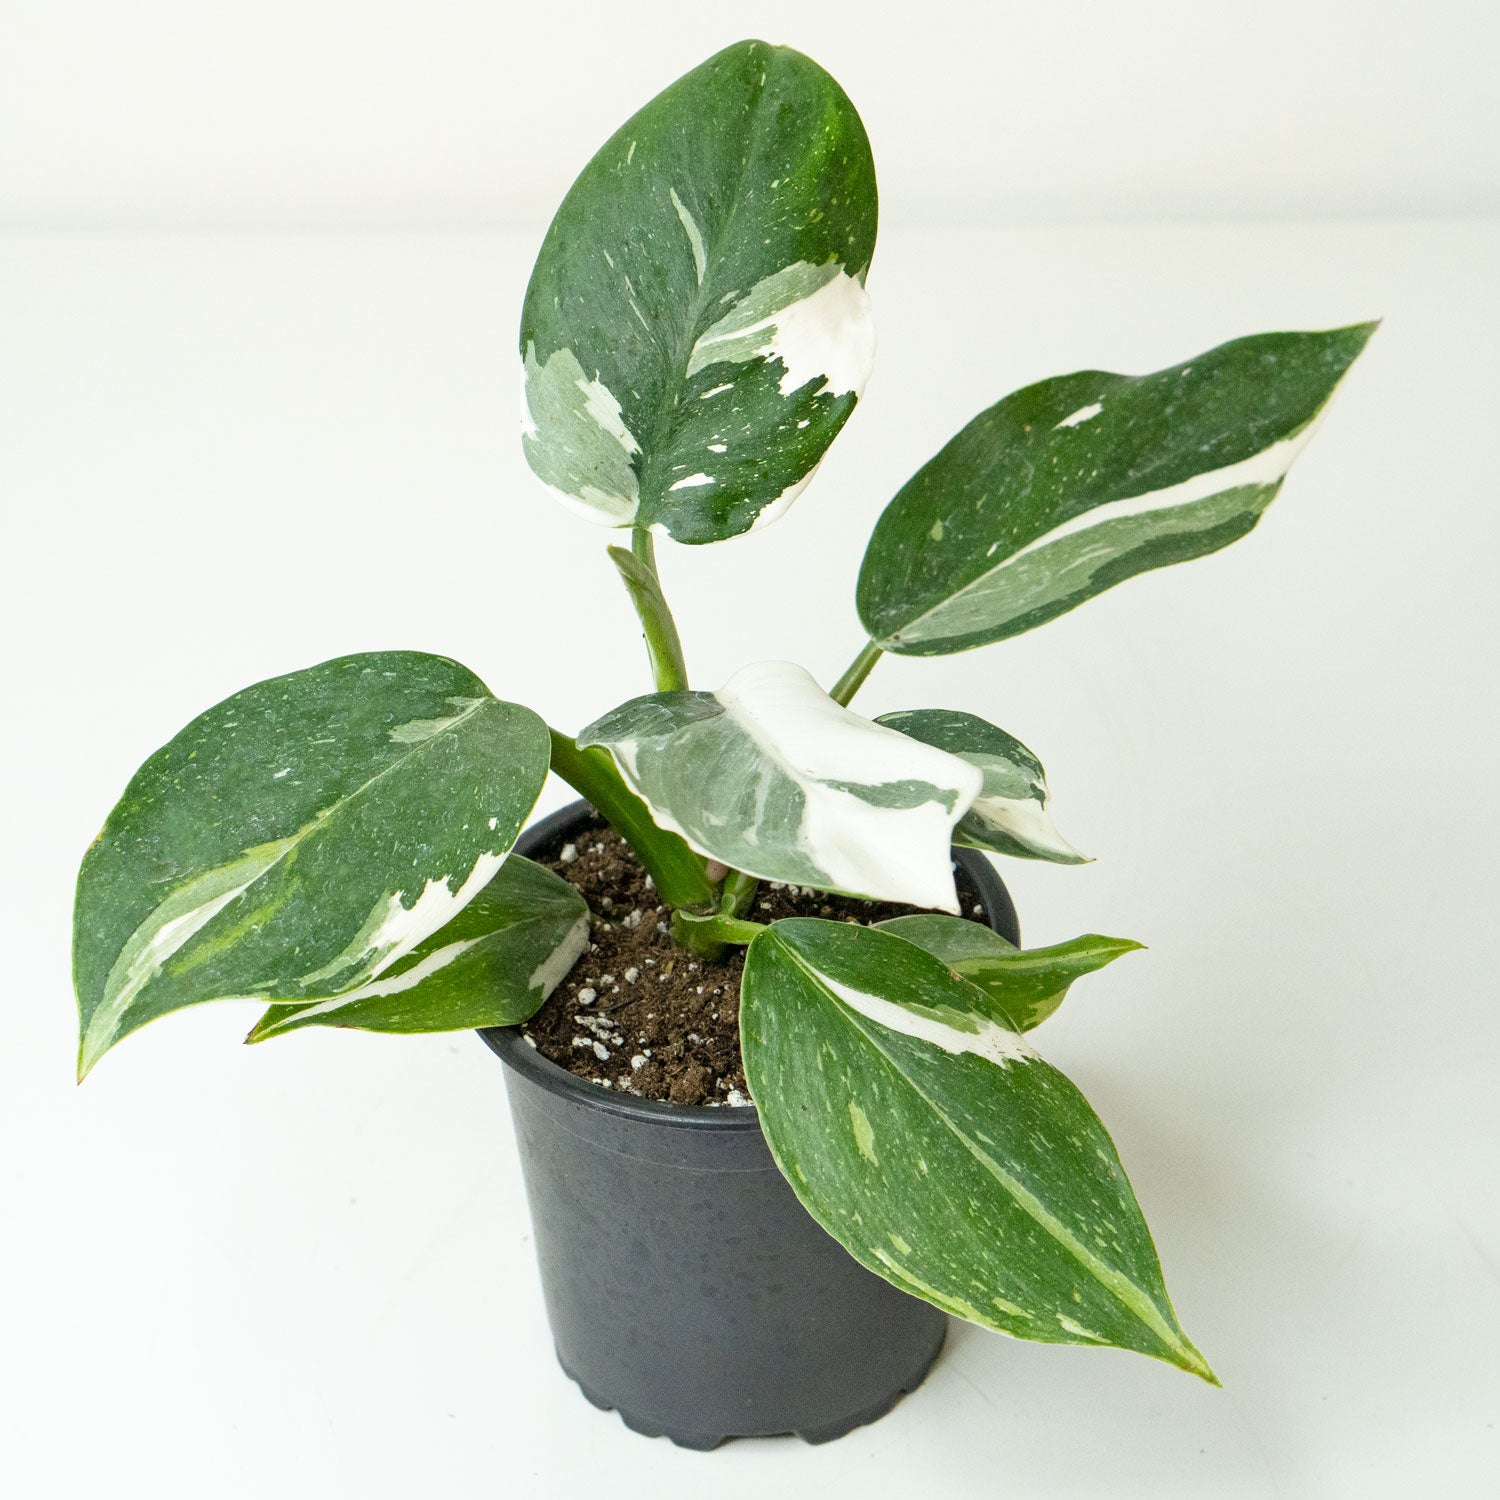 Variegated glossy leaves of Phillodendron White Wizard 4.5” - Buy repotted rare indoor plant Philodendron White Wizard for delivery at Planteia